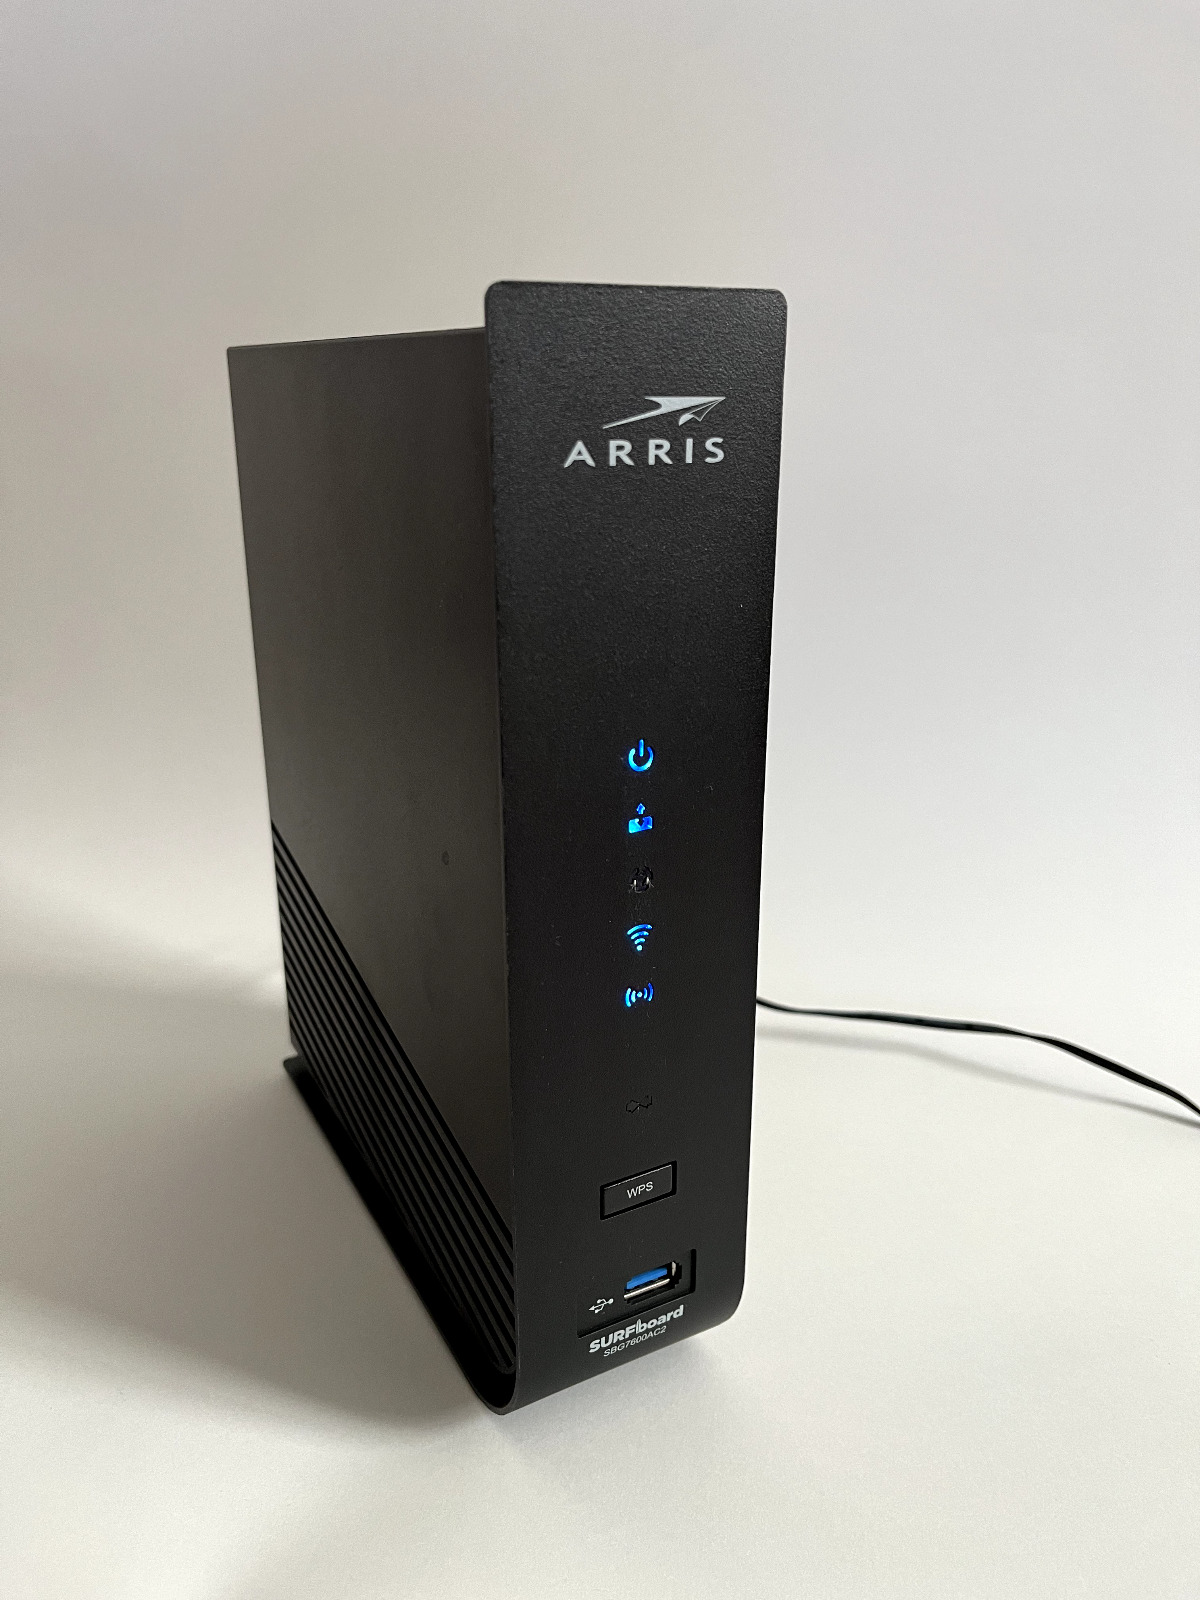 ARRIS ‎SBG7600AC2 Cable Modem Router Combo, Adapter DOCSIS 3.0